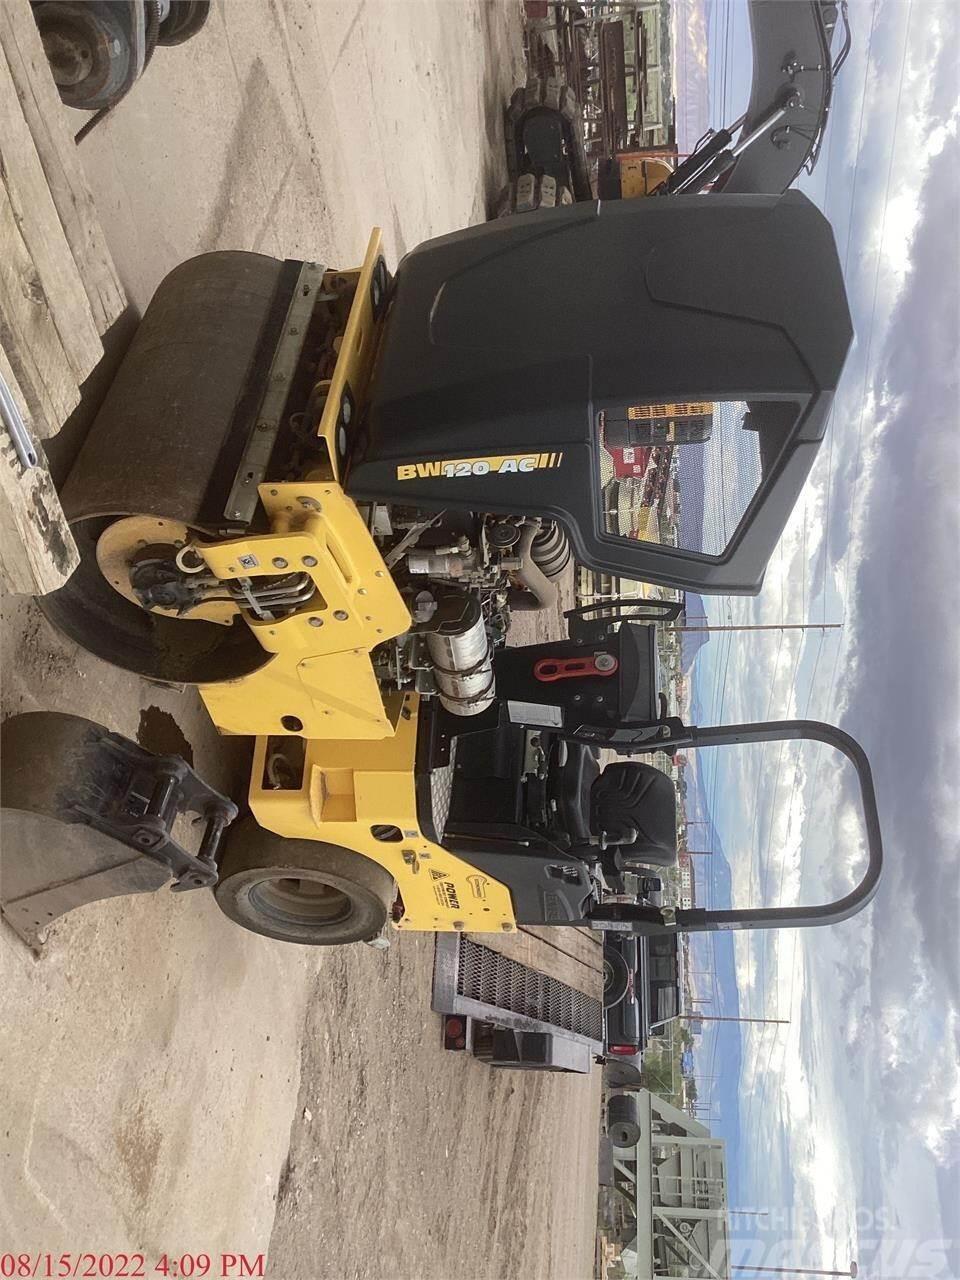 Bomag BW120AC-5 Combi rollers